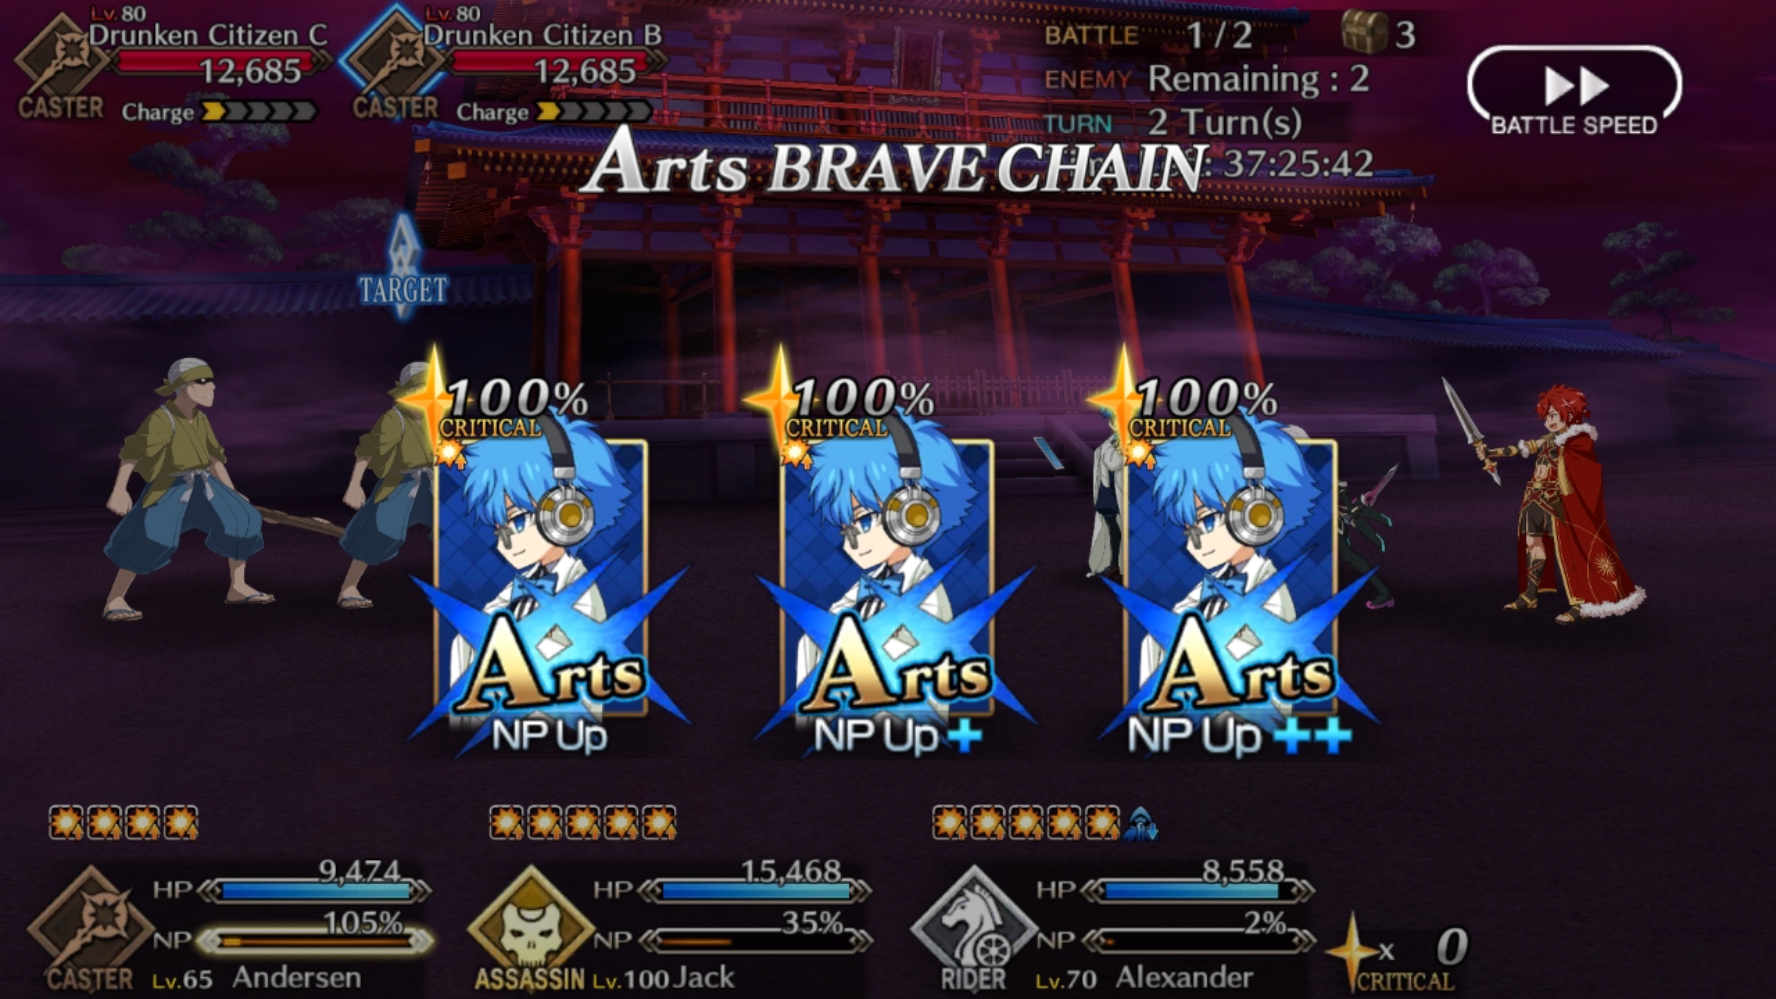 Hans performs an Arts Brave Chain